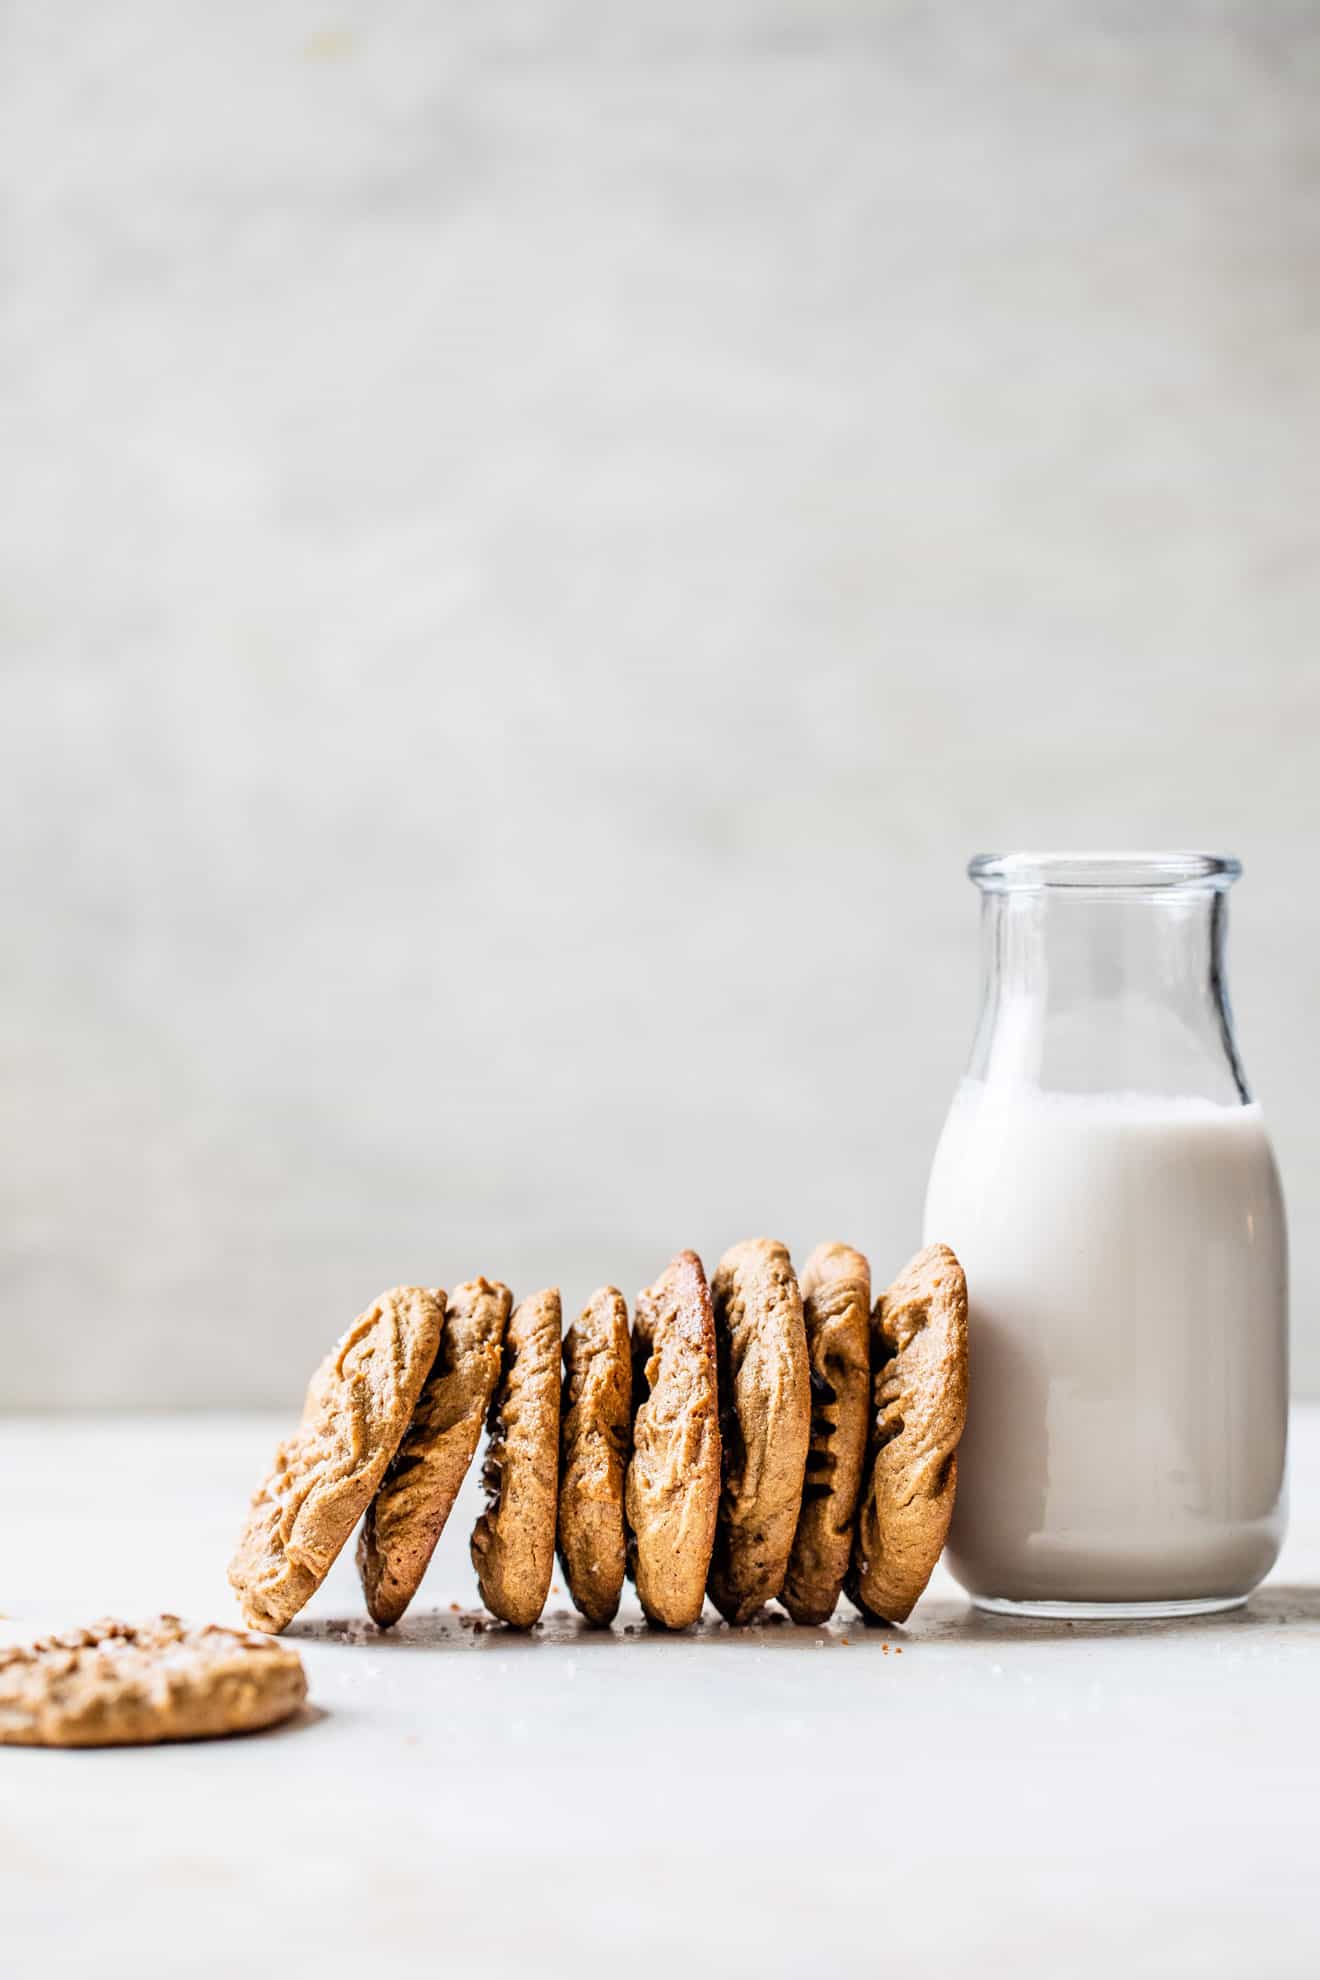 This is a side view of a a line of cookies leaning against a glass of milk. The cookies and milk are sitting on a white counter and a white background. 